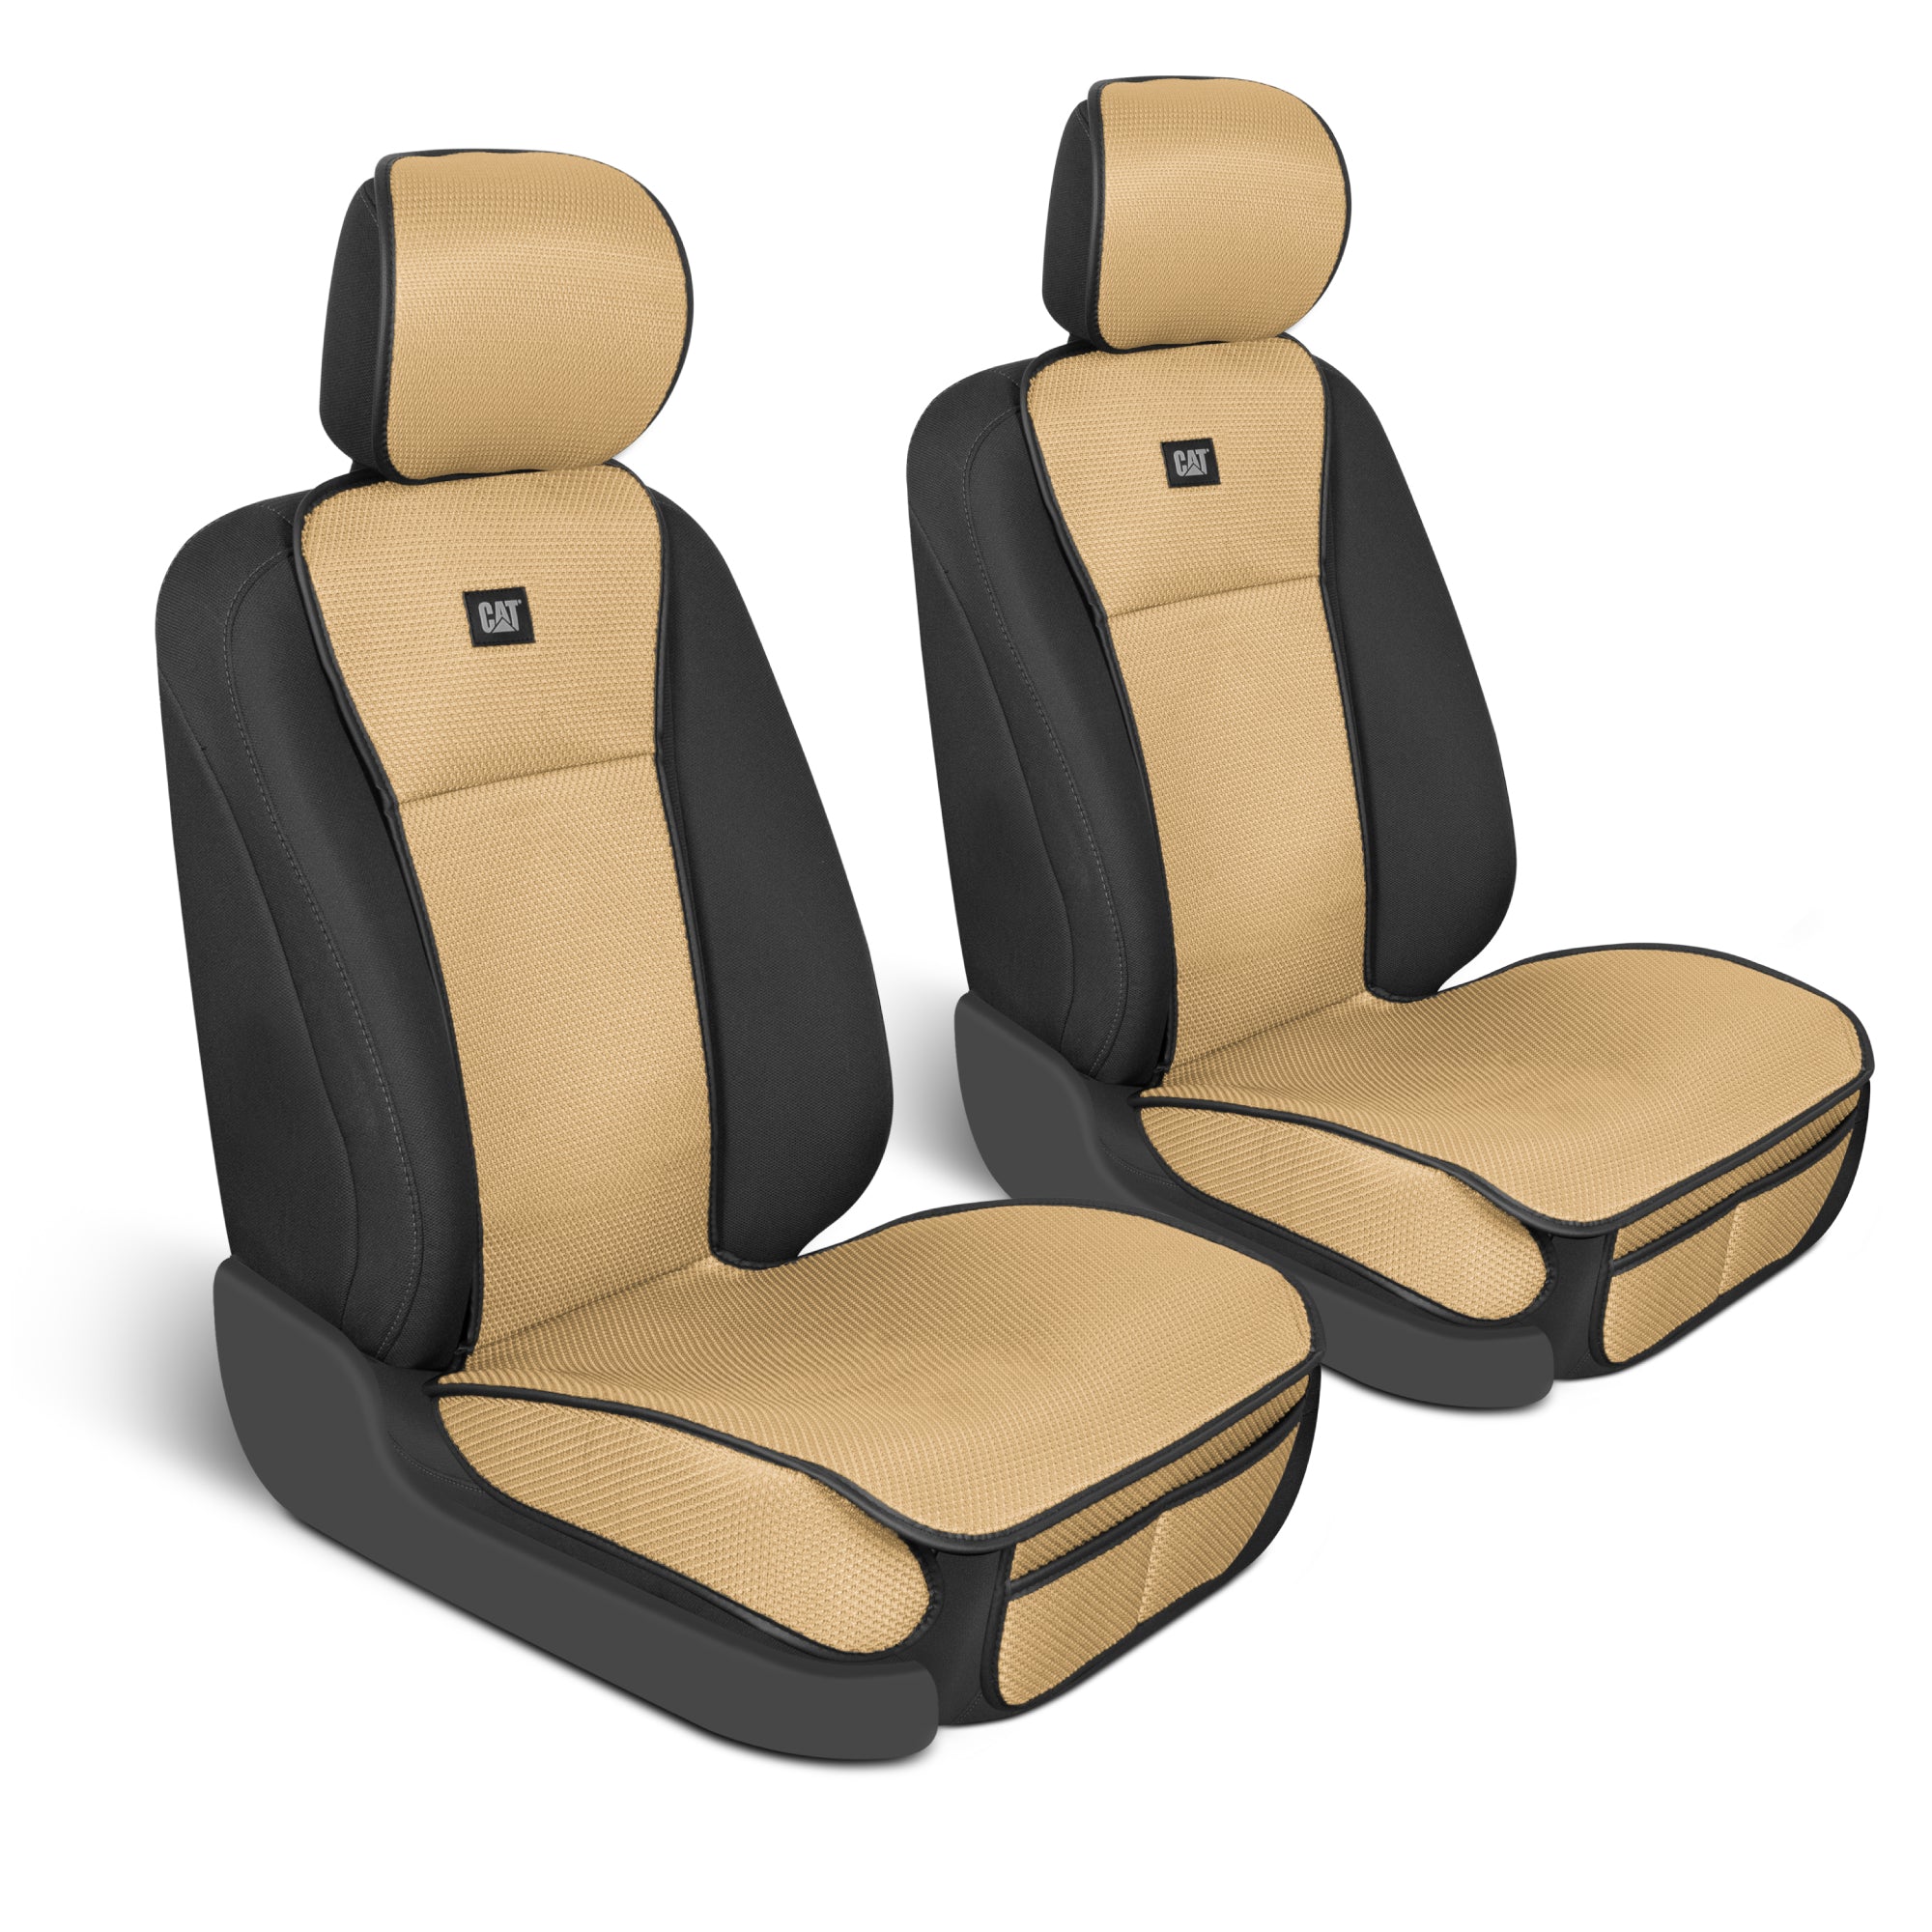 CAT 2-Pack AeroMesh Front Seat Covers - Beige